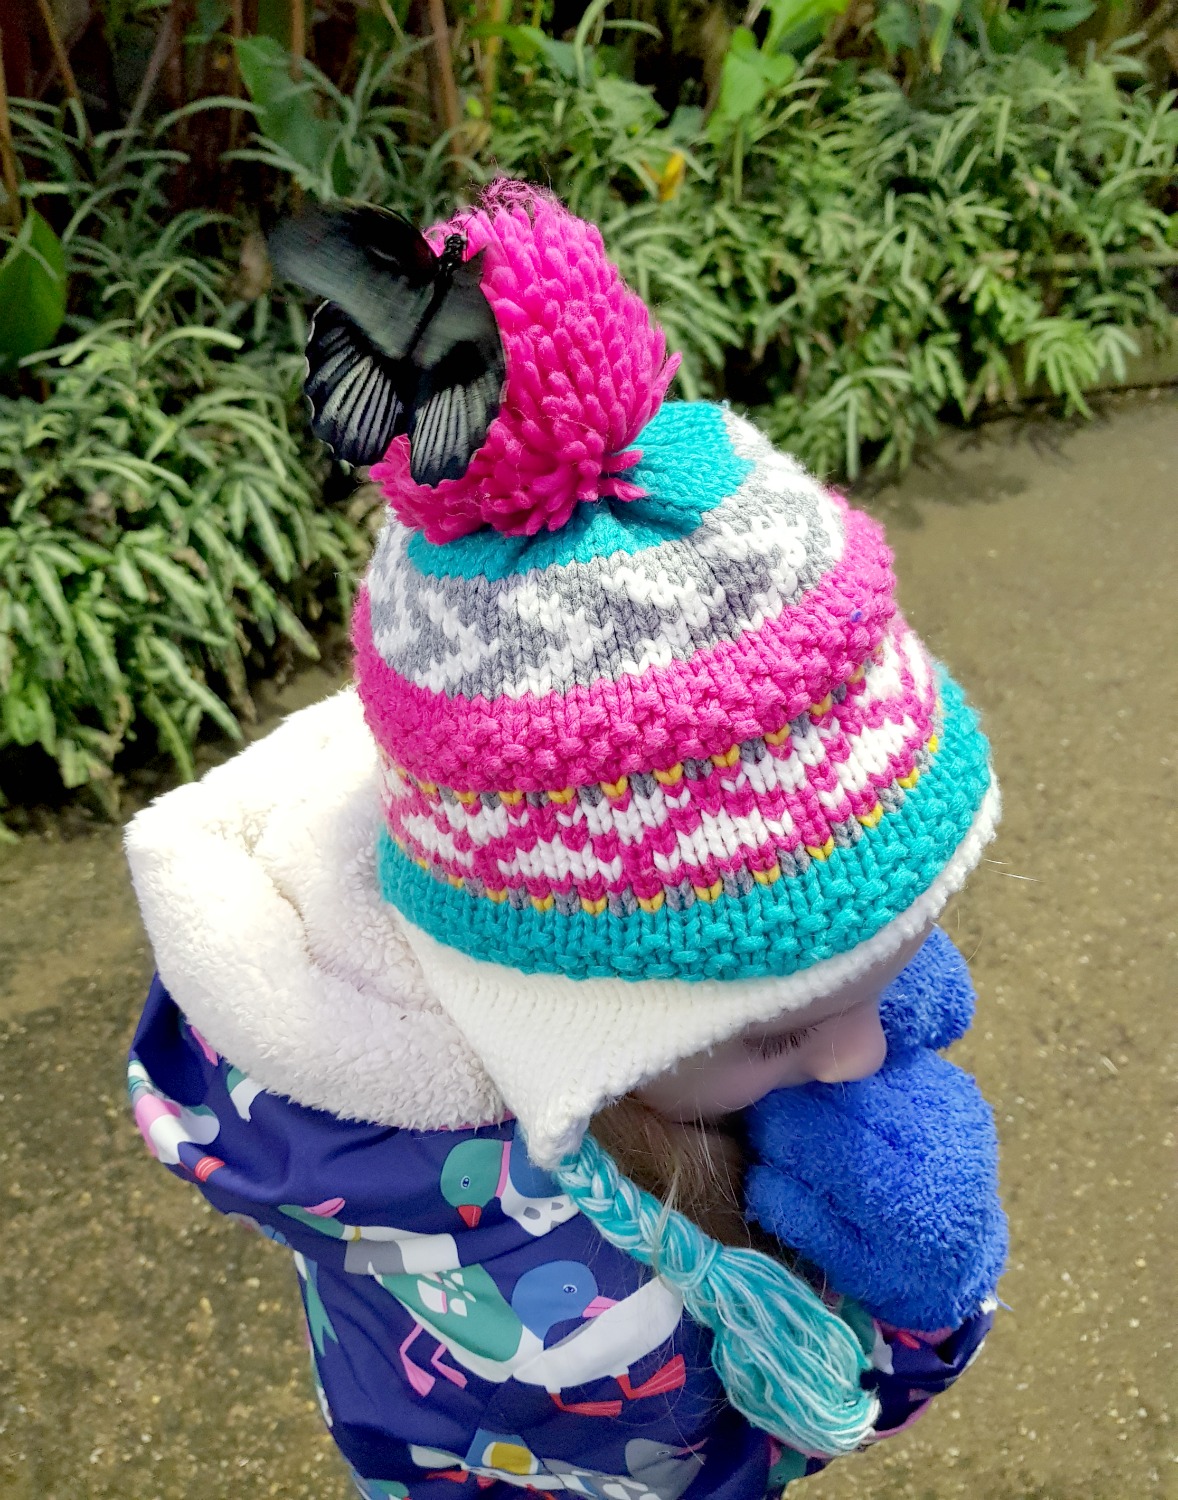 A butterfly lands on the pompom of my daughter's hat inside Butterfly Paradise - my tips for visiting London Zoo with kids